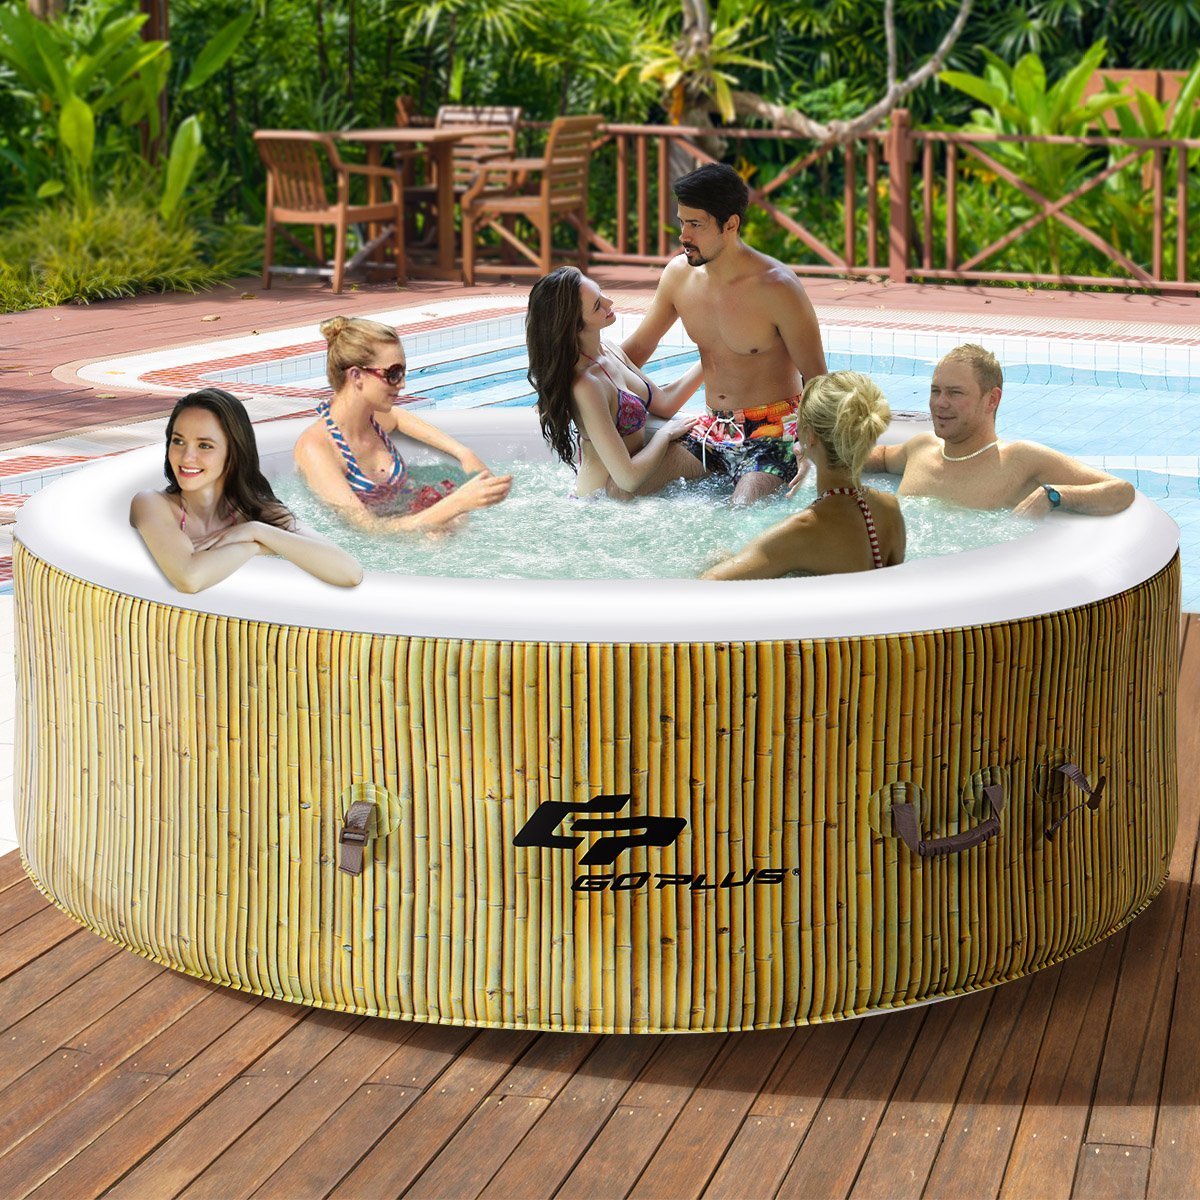 Goplus 6 Person Inflatable Hot Tub for Portable Outdoor Jets Bubble Massage...